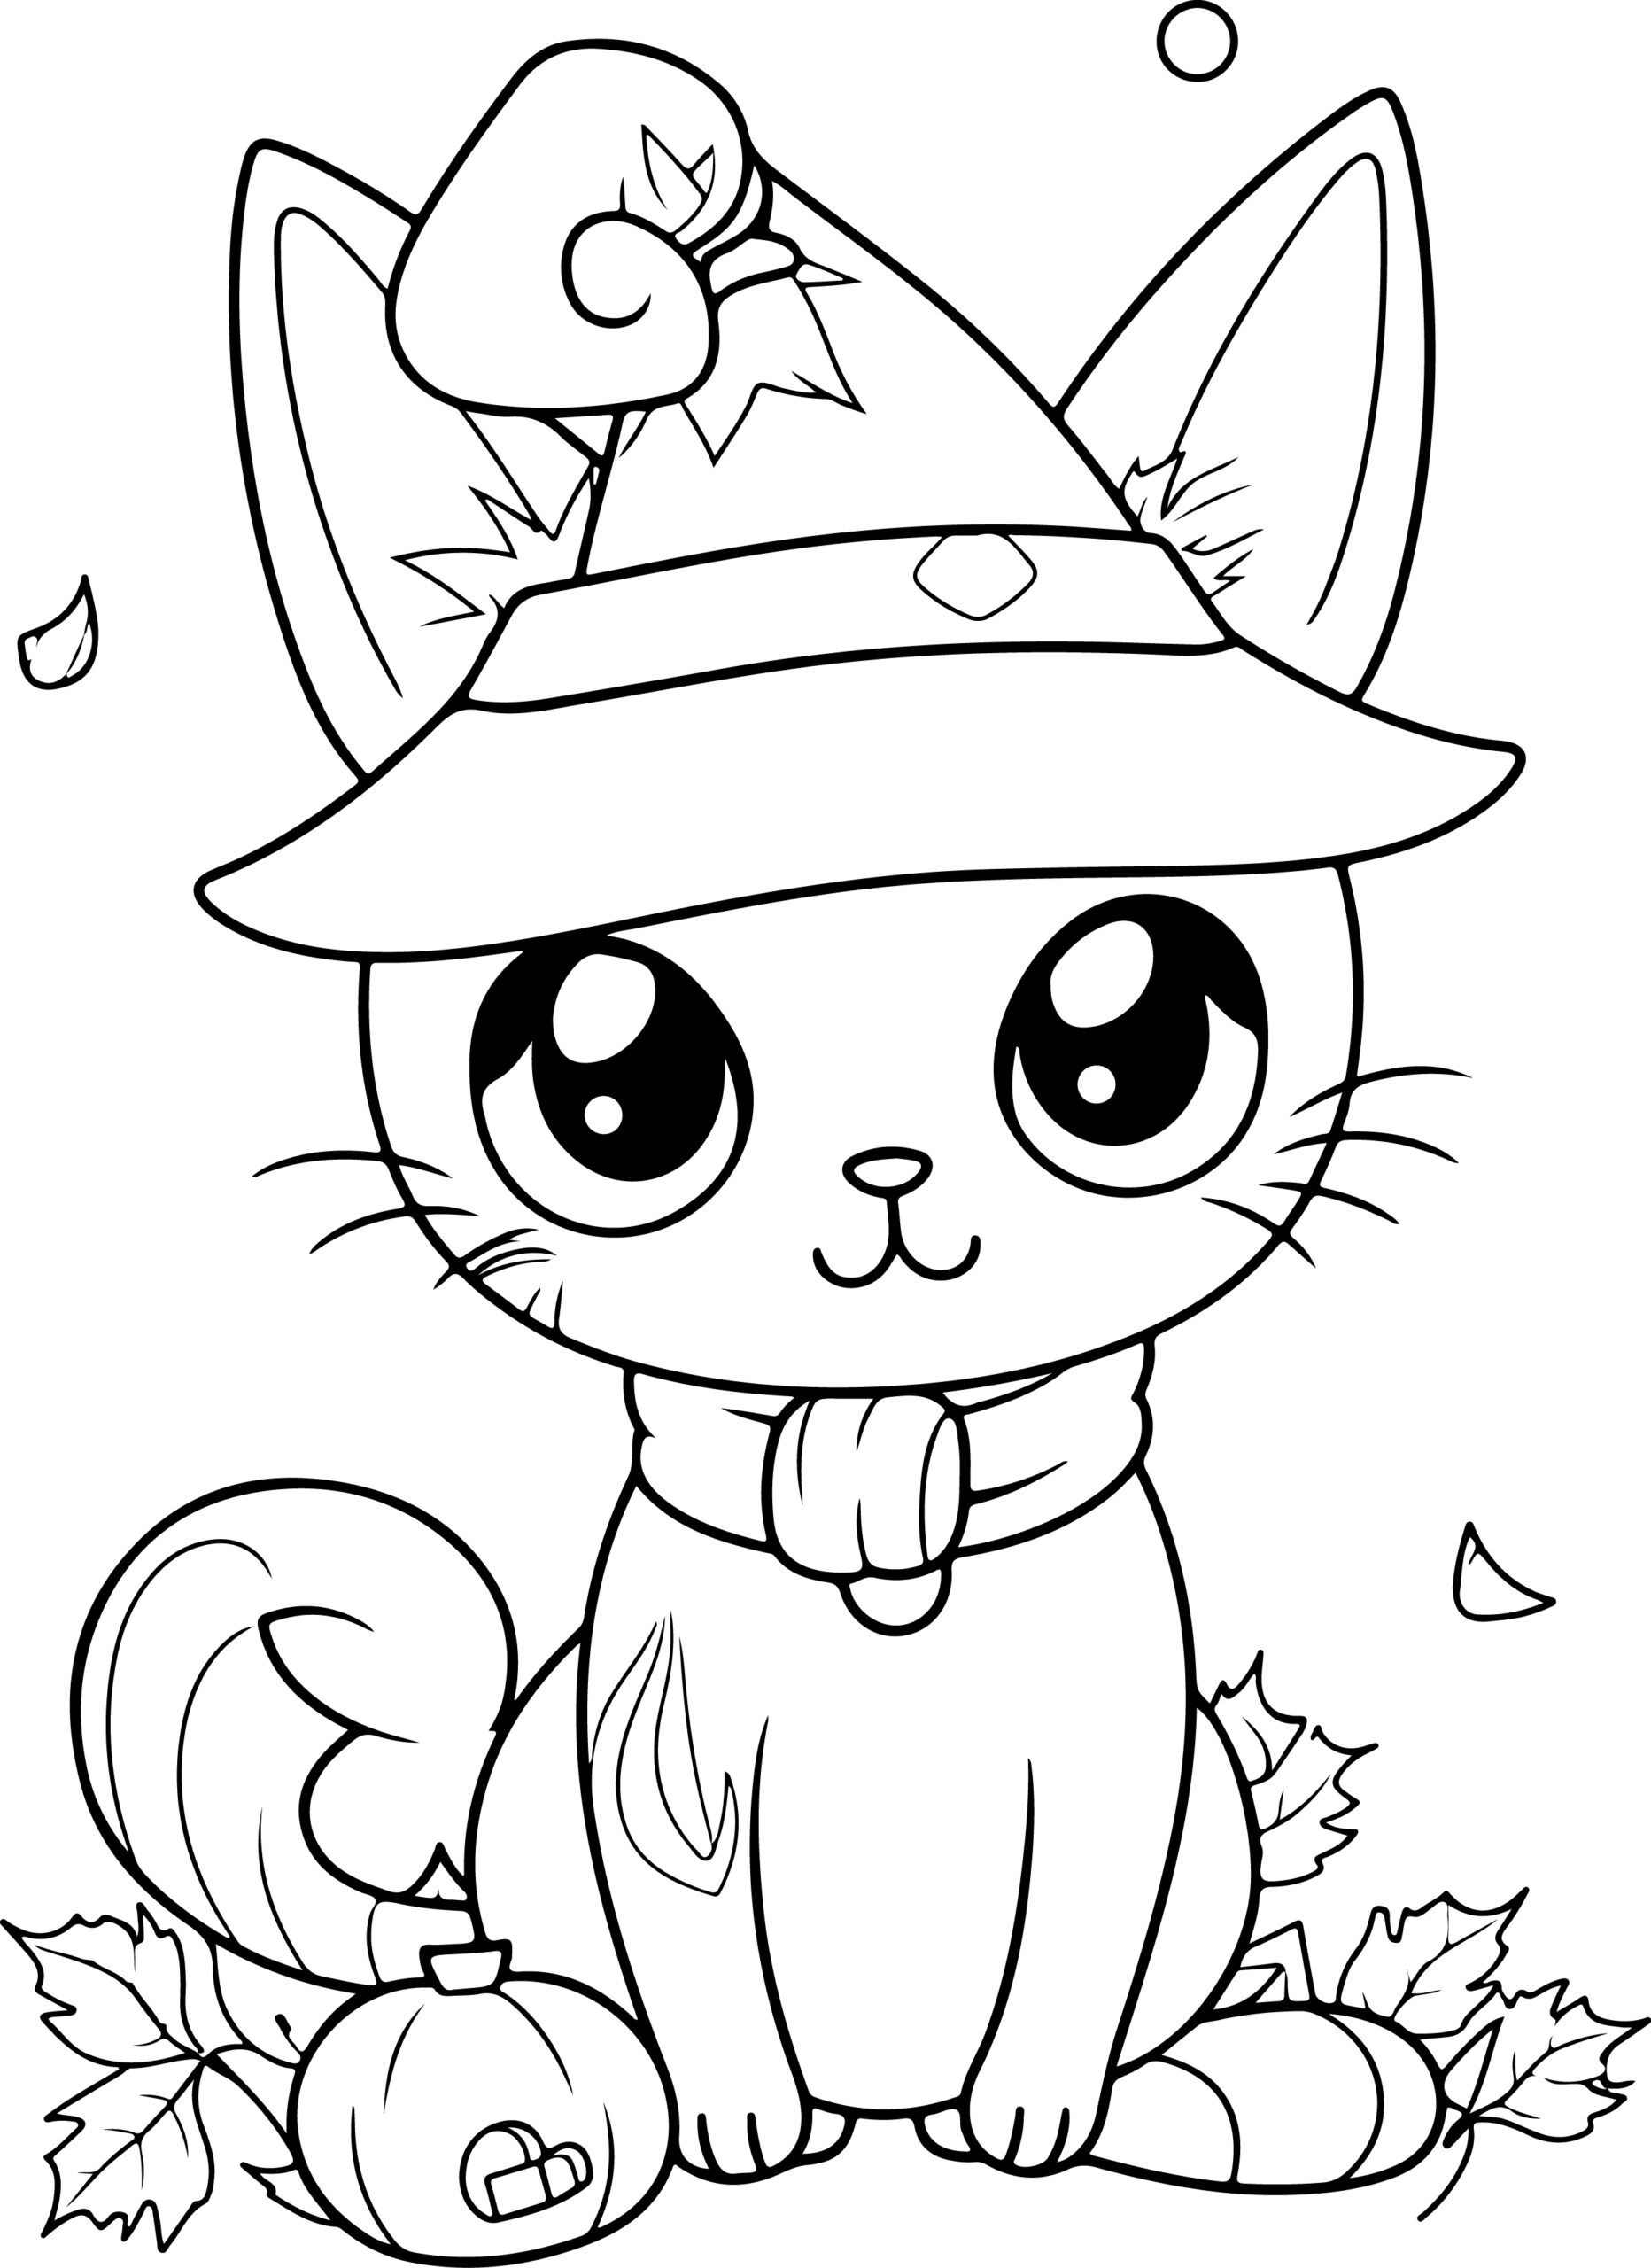 Halloween coloring book beautiful cat coloring pages cute cats ghosts pumpkins made by teachers